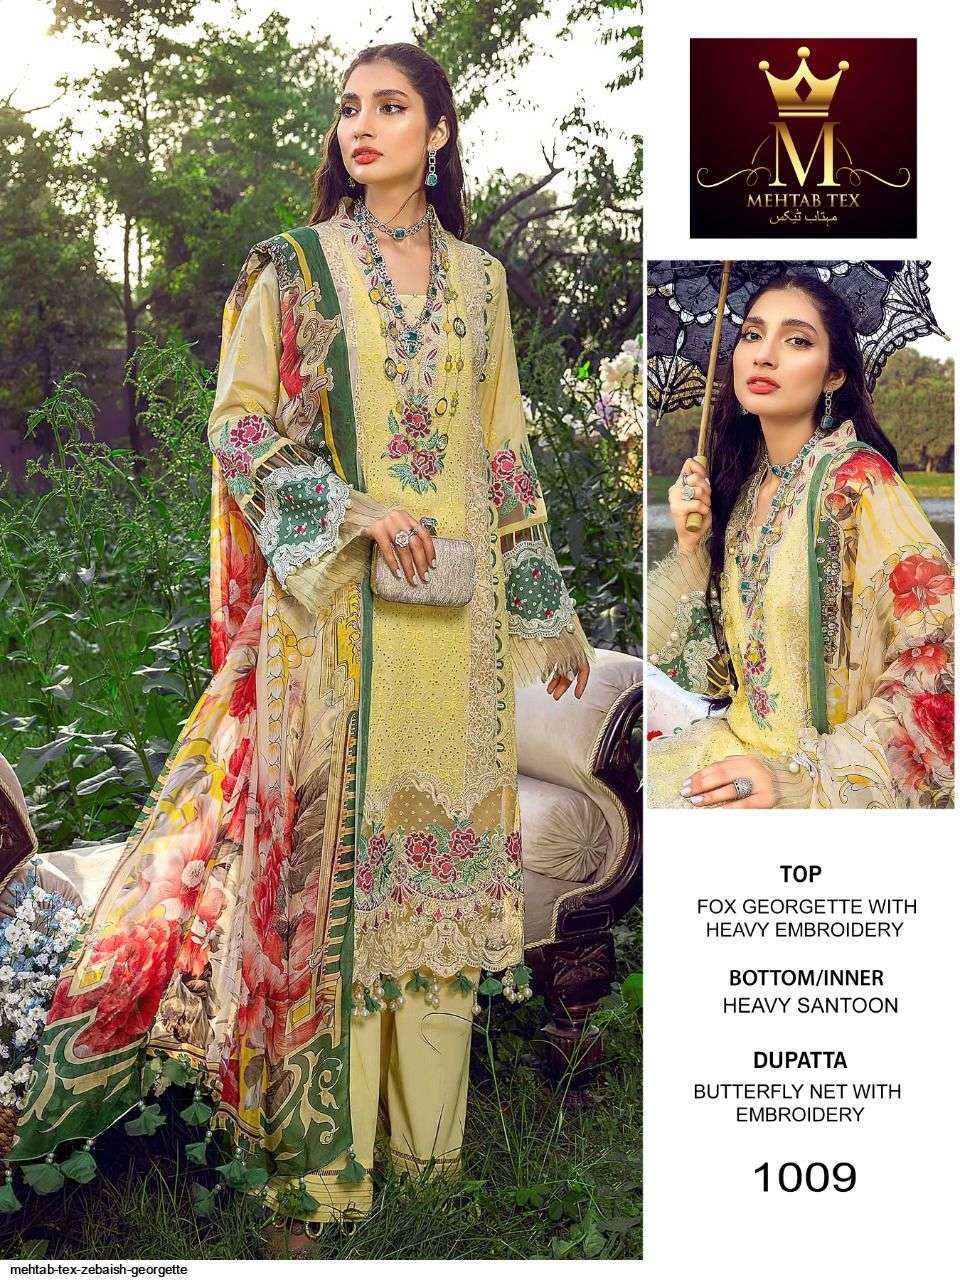 Zebaish By Mehtab Tex 1008 To 1010 Series Pakistani Suits Beautiful Fancy Colorful Stylish Party Wear & Occasional Wear Faux Georgette With Embroidery Dresses At Wholesale Price